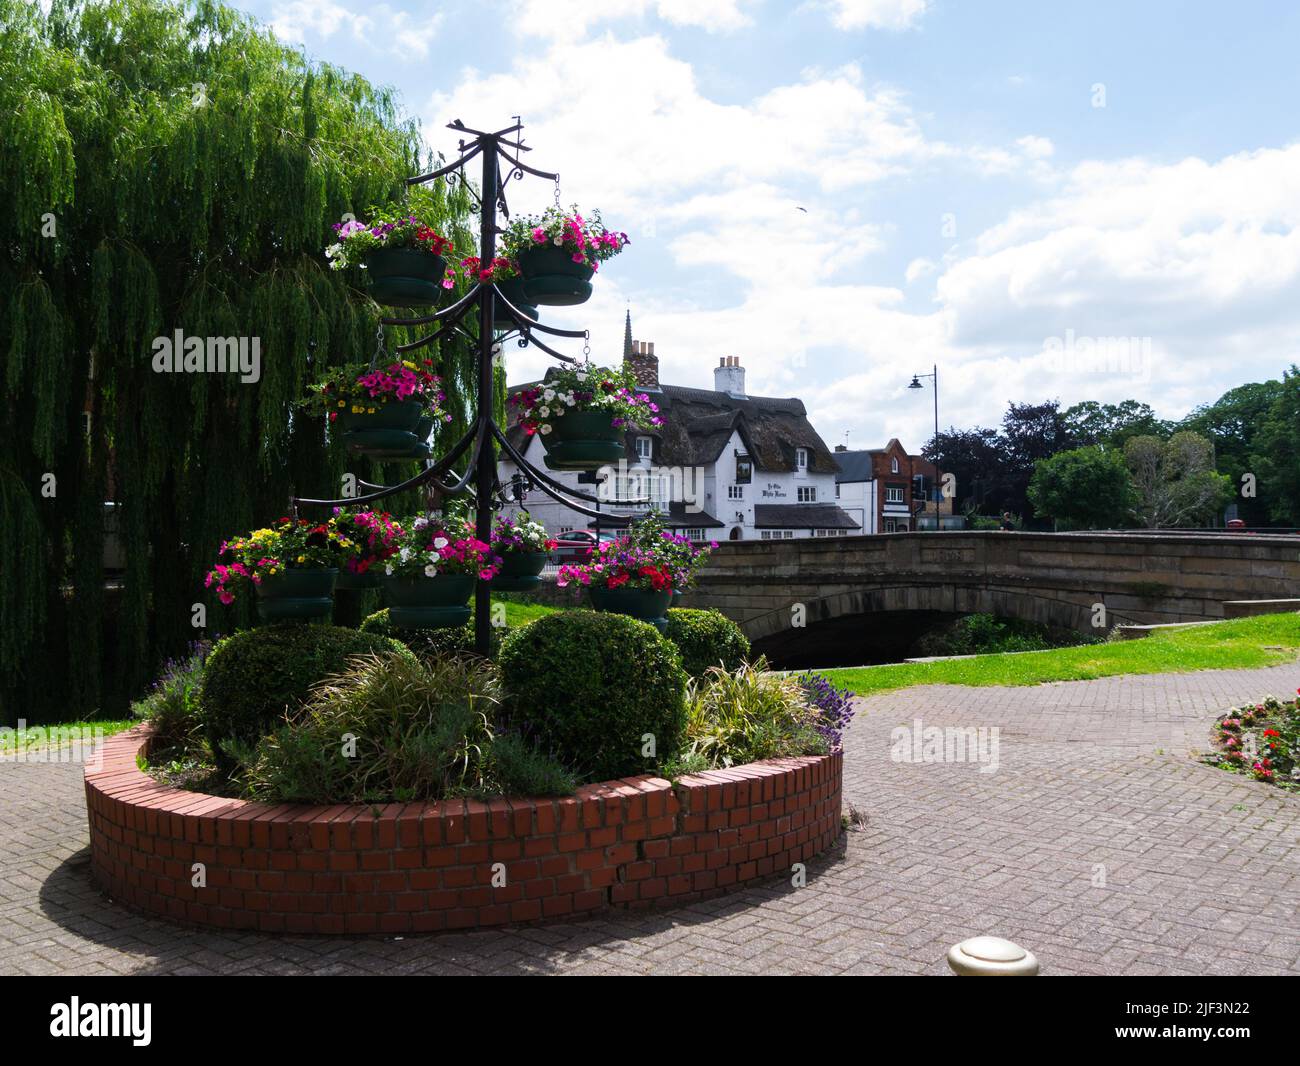 View across River Welland road bridge towards Ye Olde White Horse Inn built in 1553 as Bergry House Churchgate Spalding Lincolnshire England UK Stock Photo